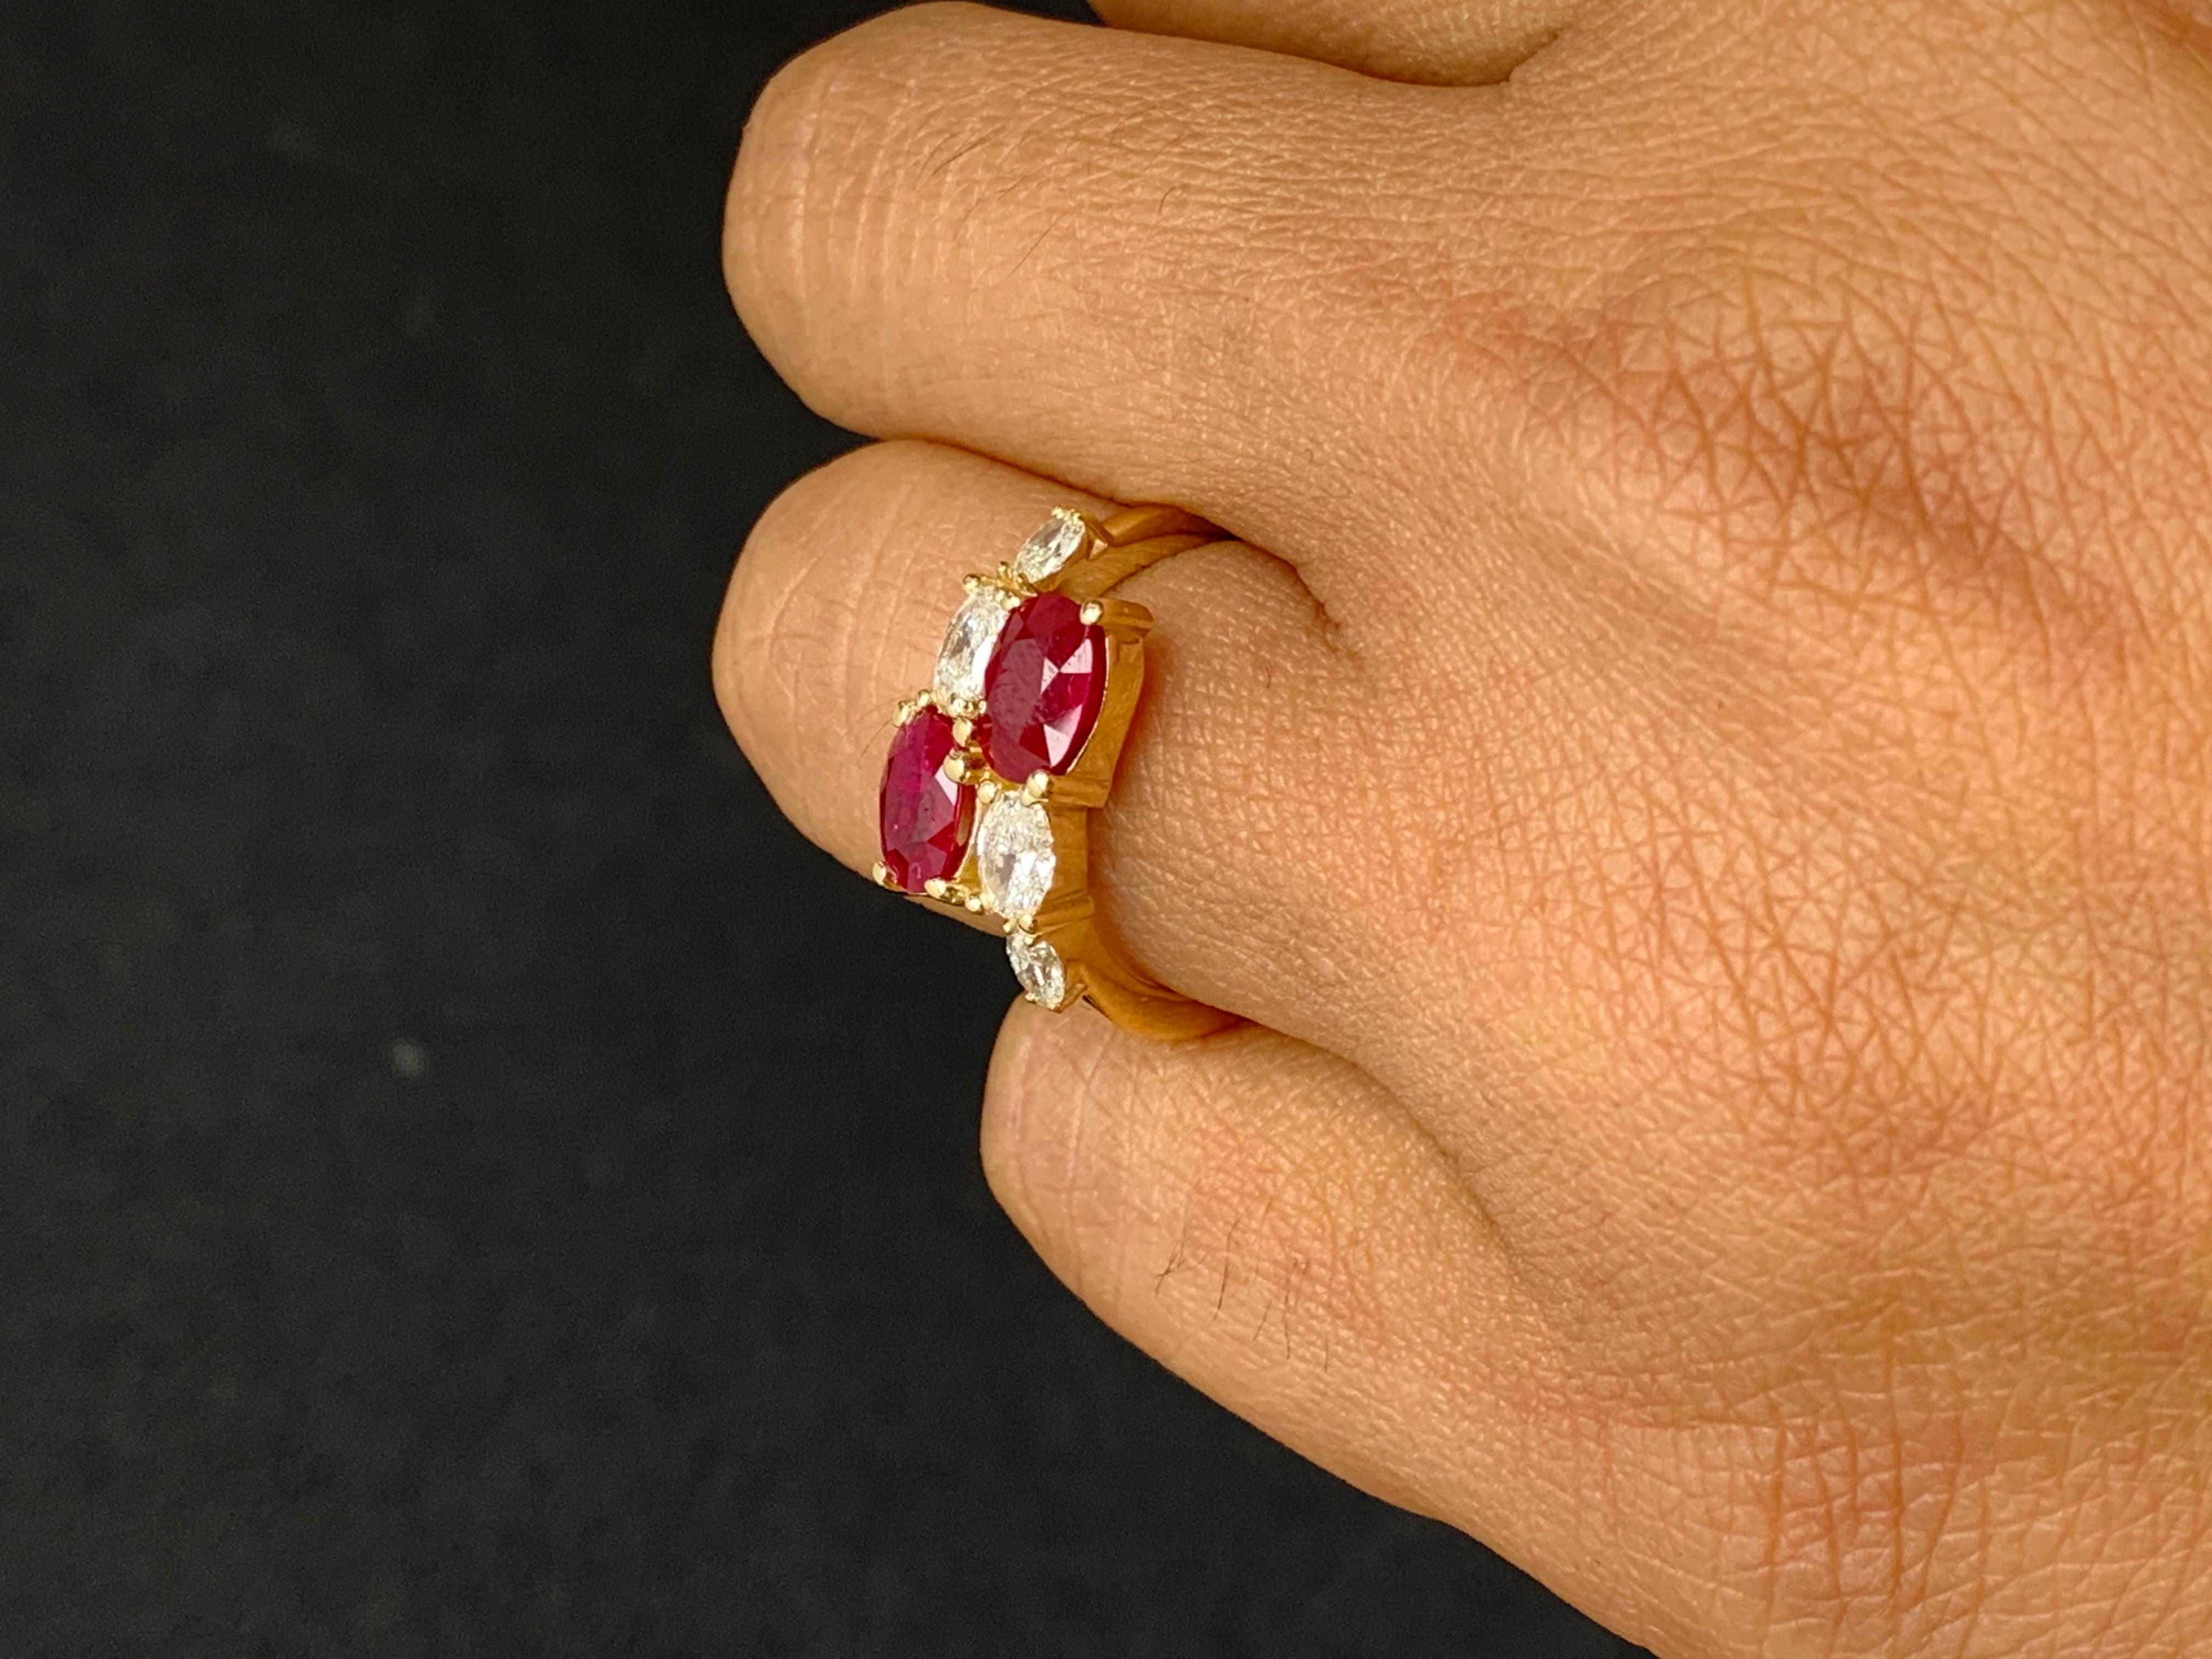 Modern 2.18 Carat Oval Cut Ruby Diamond Toi et Moi Engagement Ring in 14K Yellow Gold For Sale